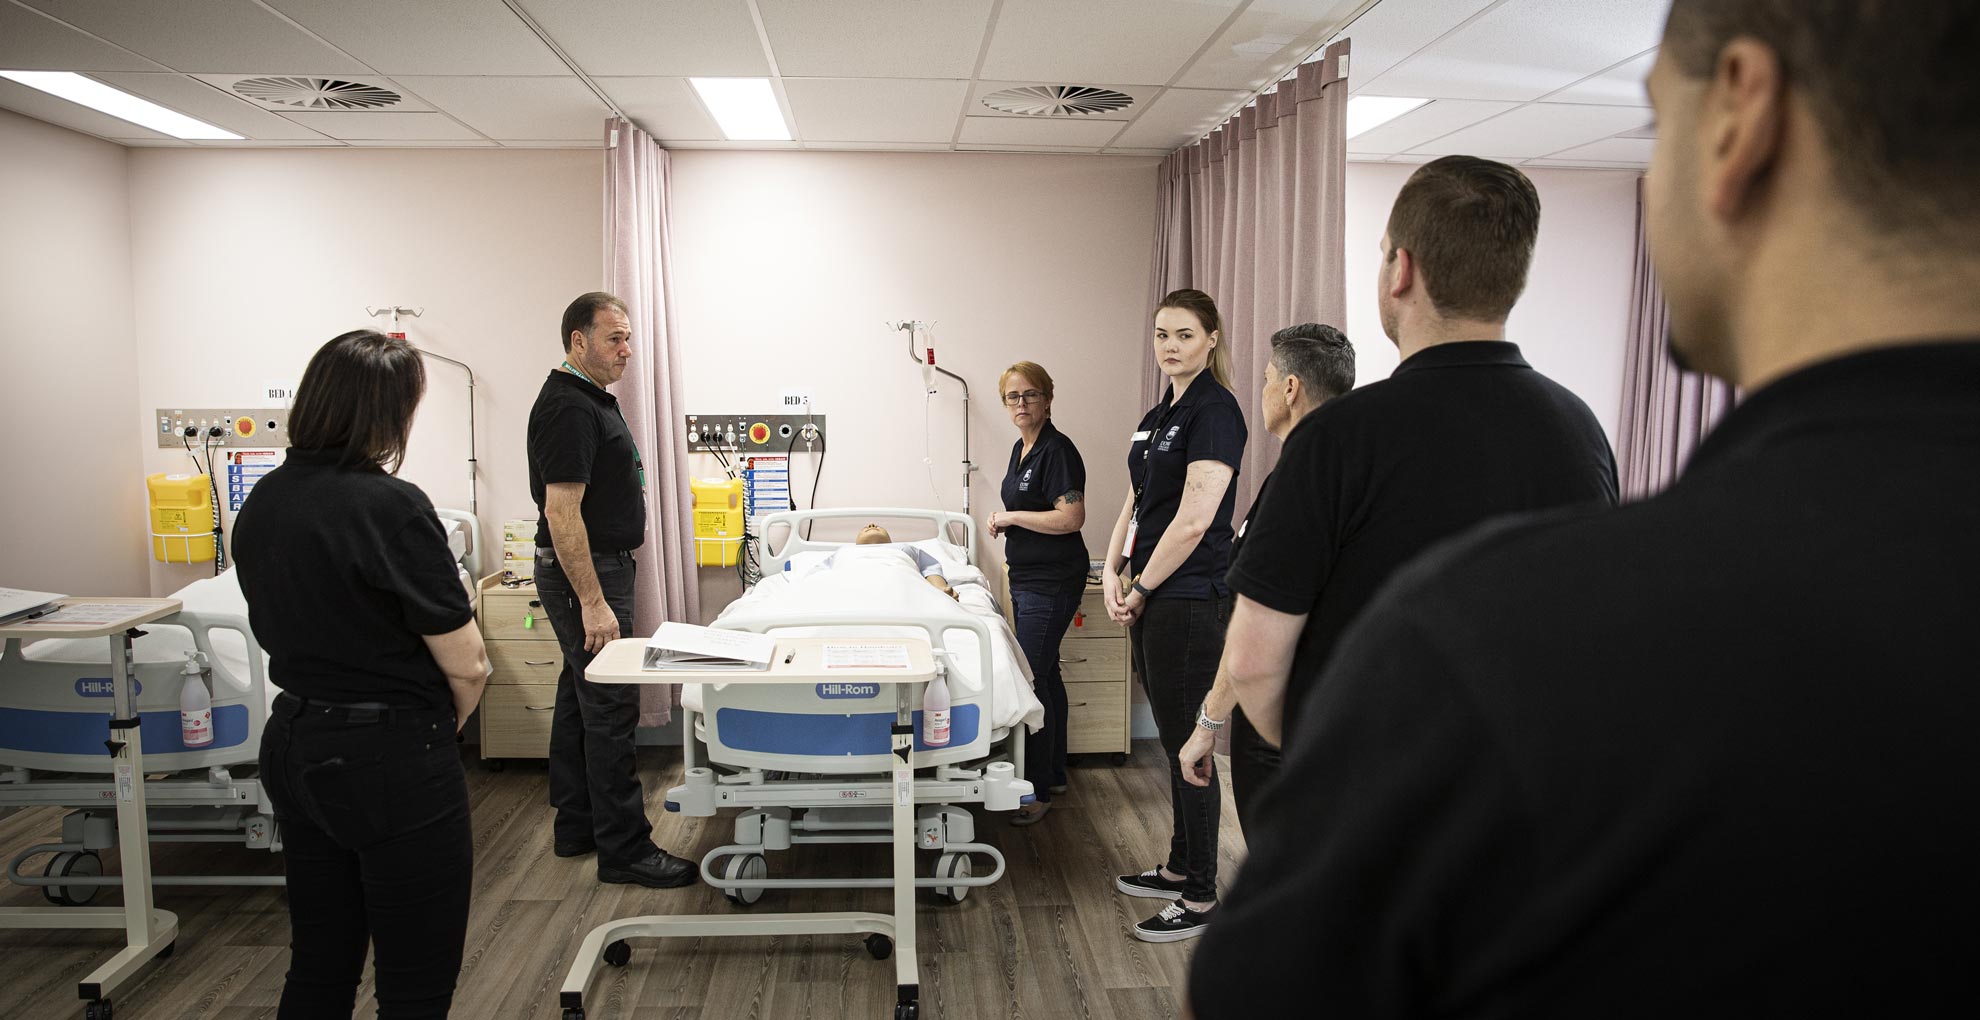 BAMS employees take part in infection control training at UOW's South Western Sydney Campus. Photo: Paul Jones